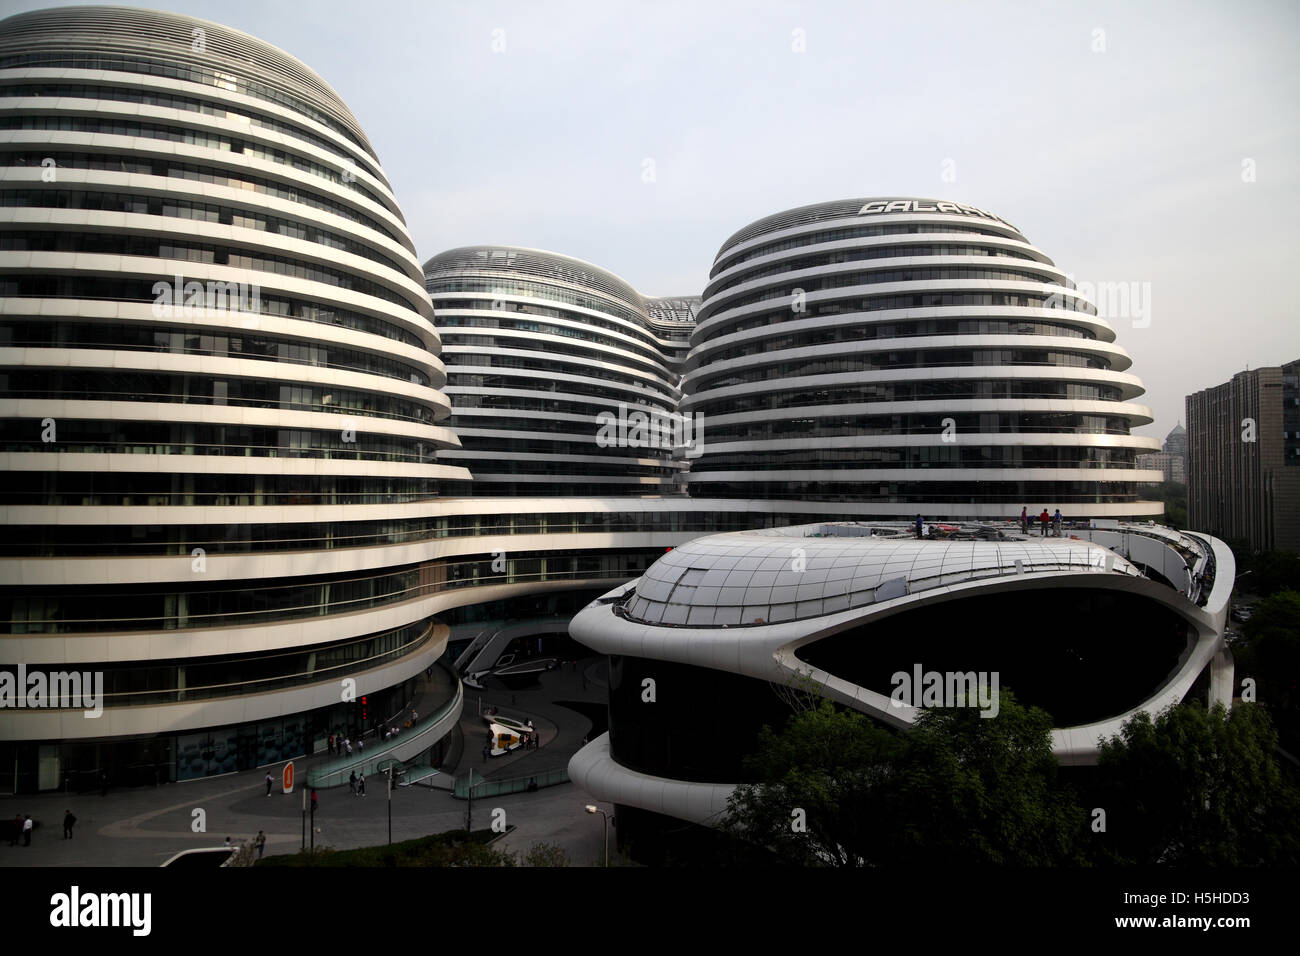 The Galaxy Soho complex of buildings designed by architect Zaha Hadid with repairs being done on the roof of one of the parts. Stock Photo